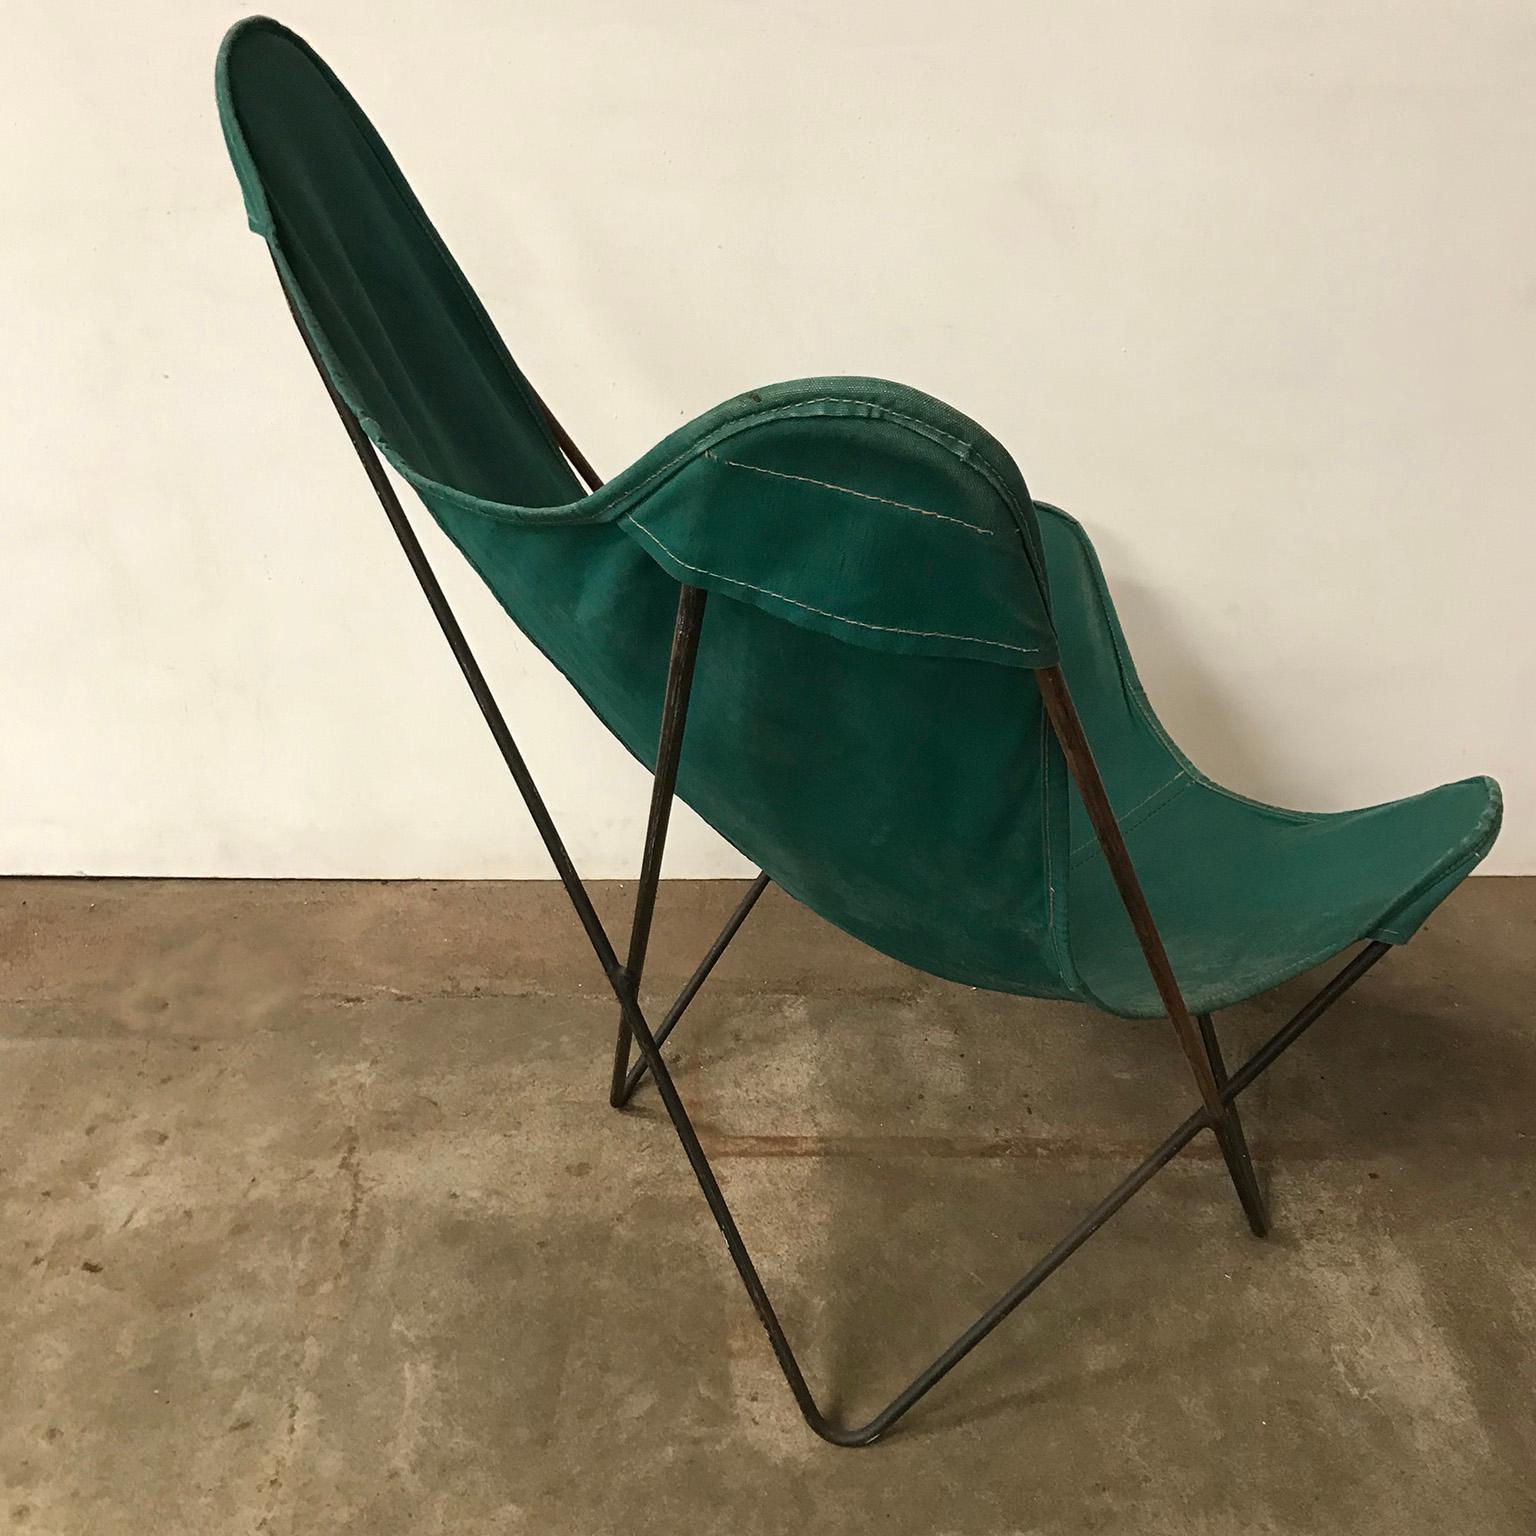 1947, Hardoy, Ferrari, Green Cover with Grey Base Butterfly Chair 6